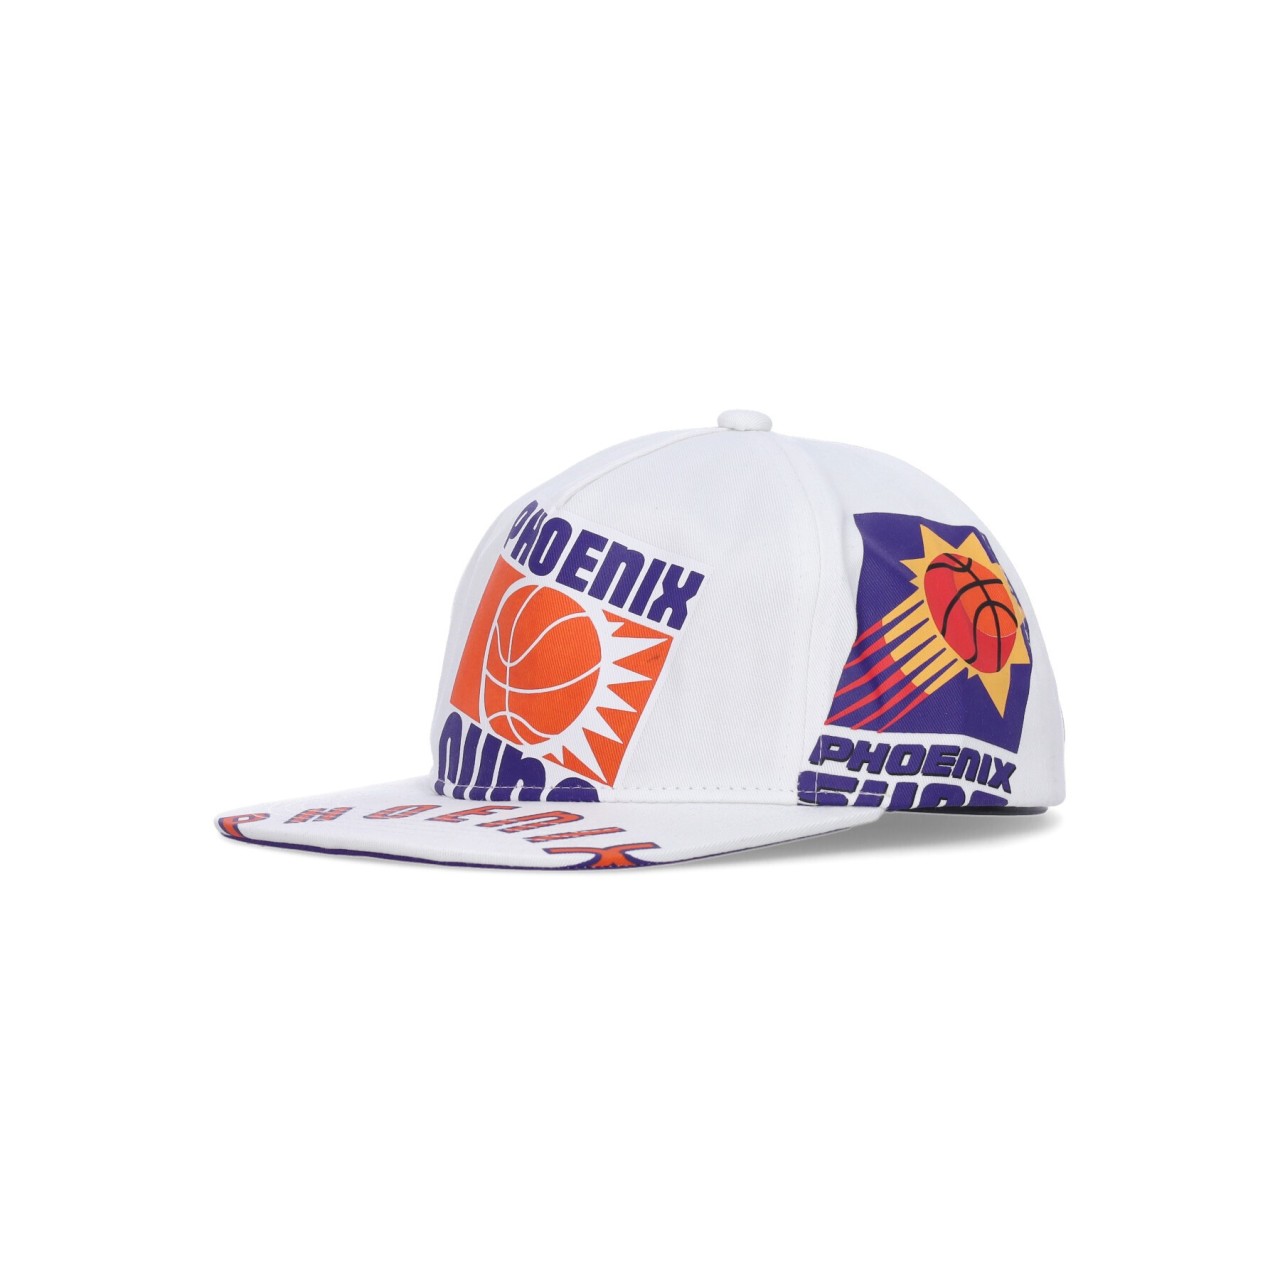 MITCHELL & NESS NBA IN YOUR FACE DEADSTOCK HWC PHOSUN HMUS5600-PSUYYPPPWHIT